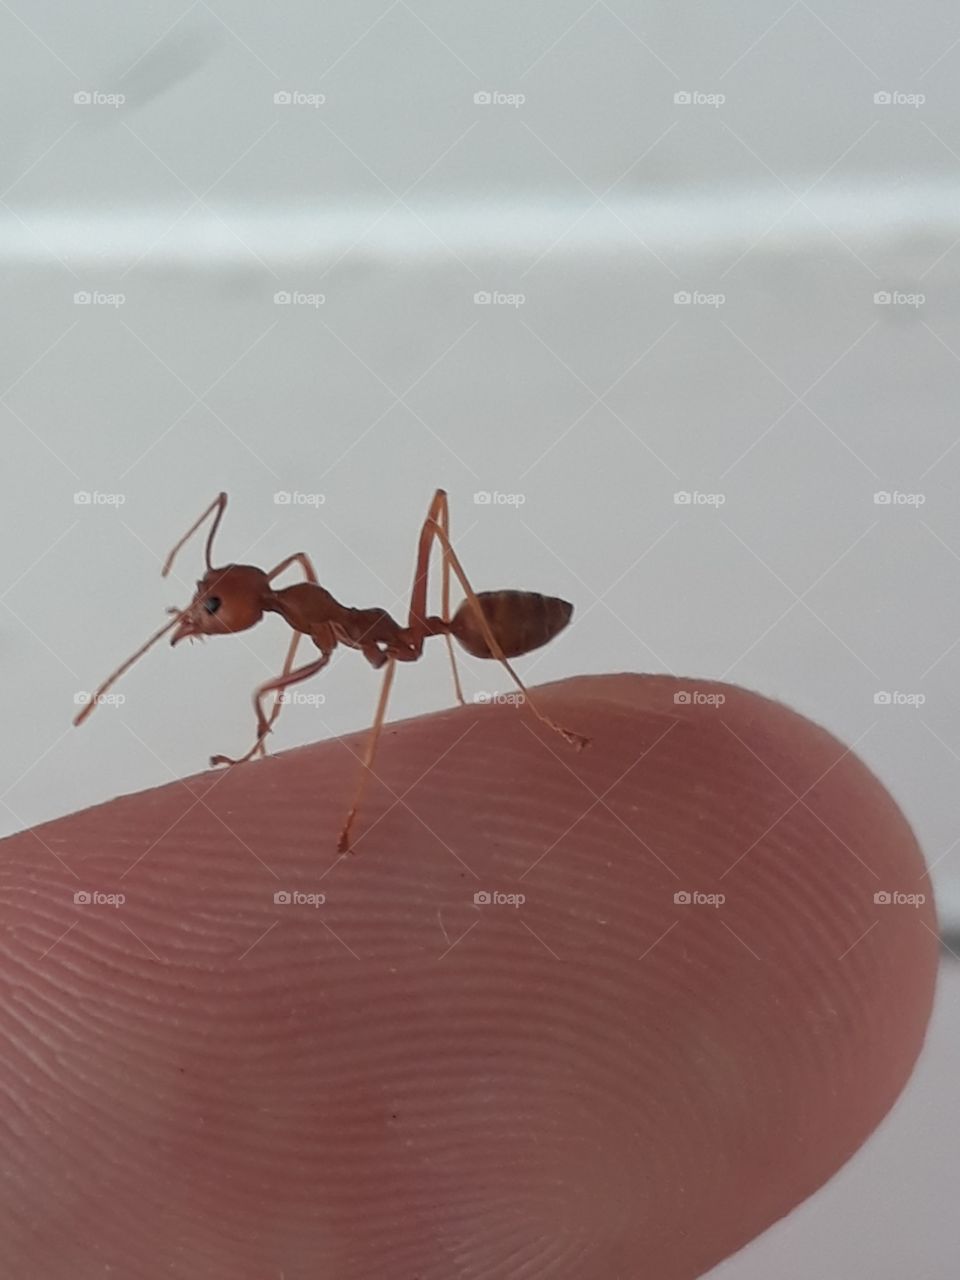 An elegant red ant on an adventure on my finger